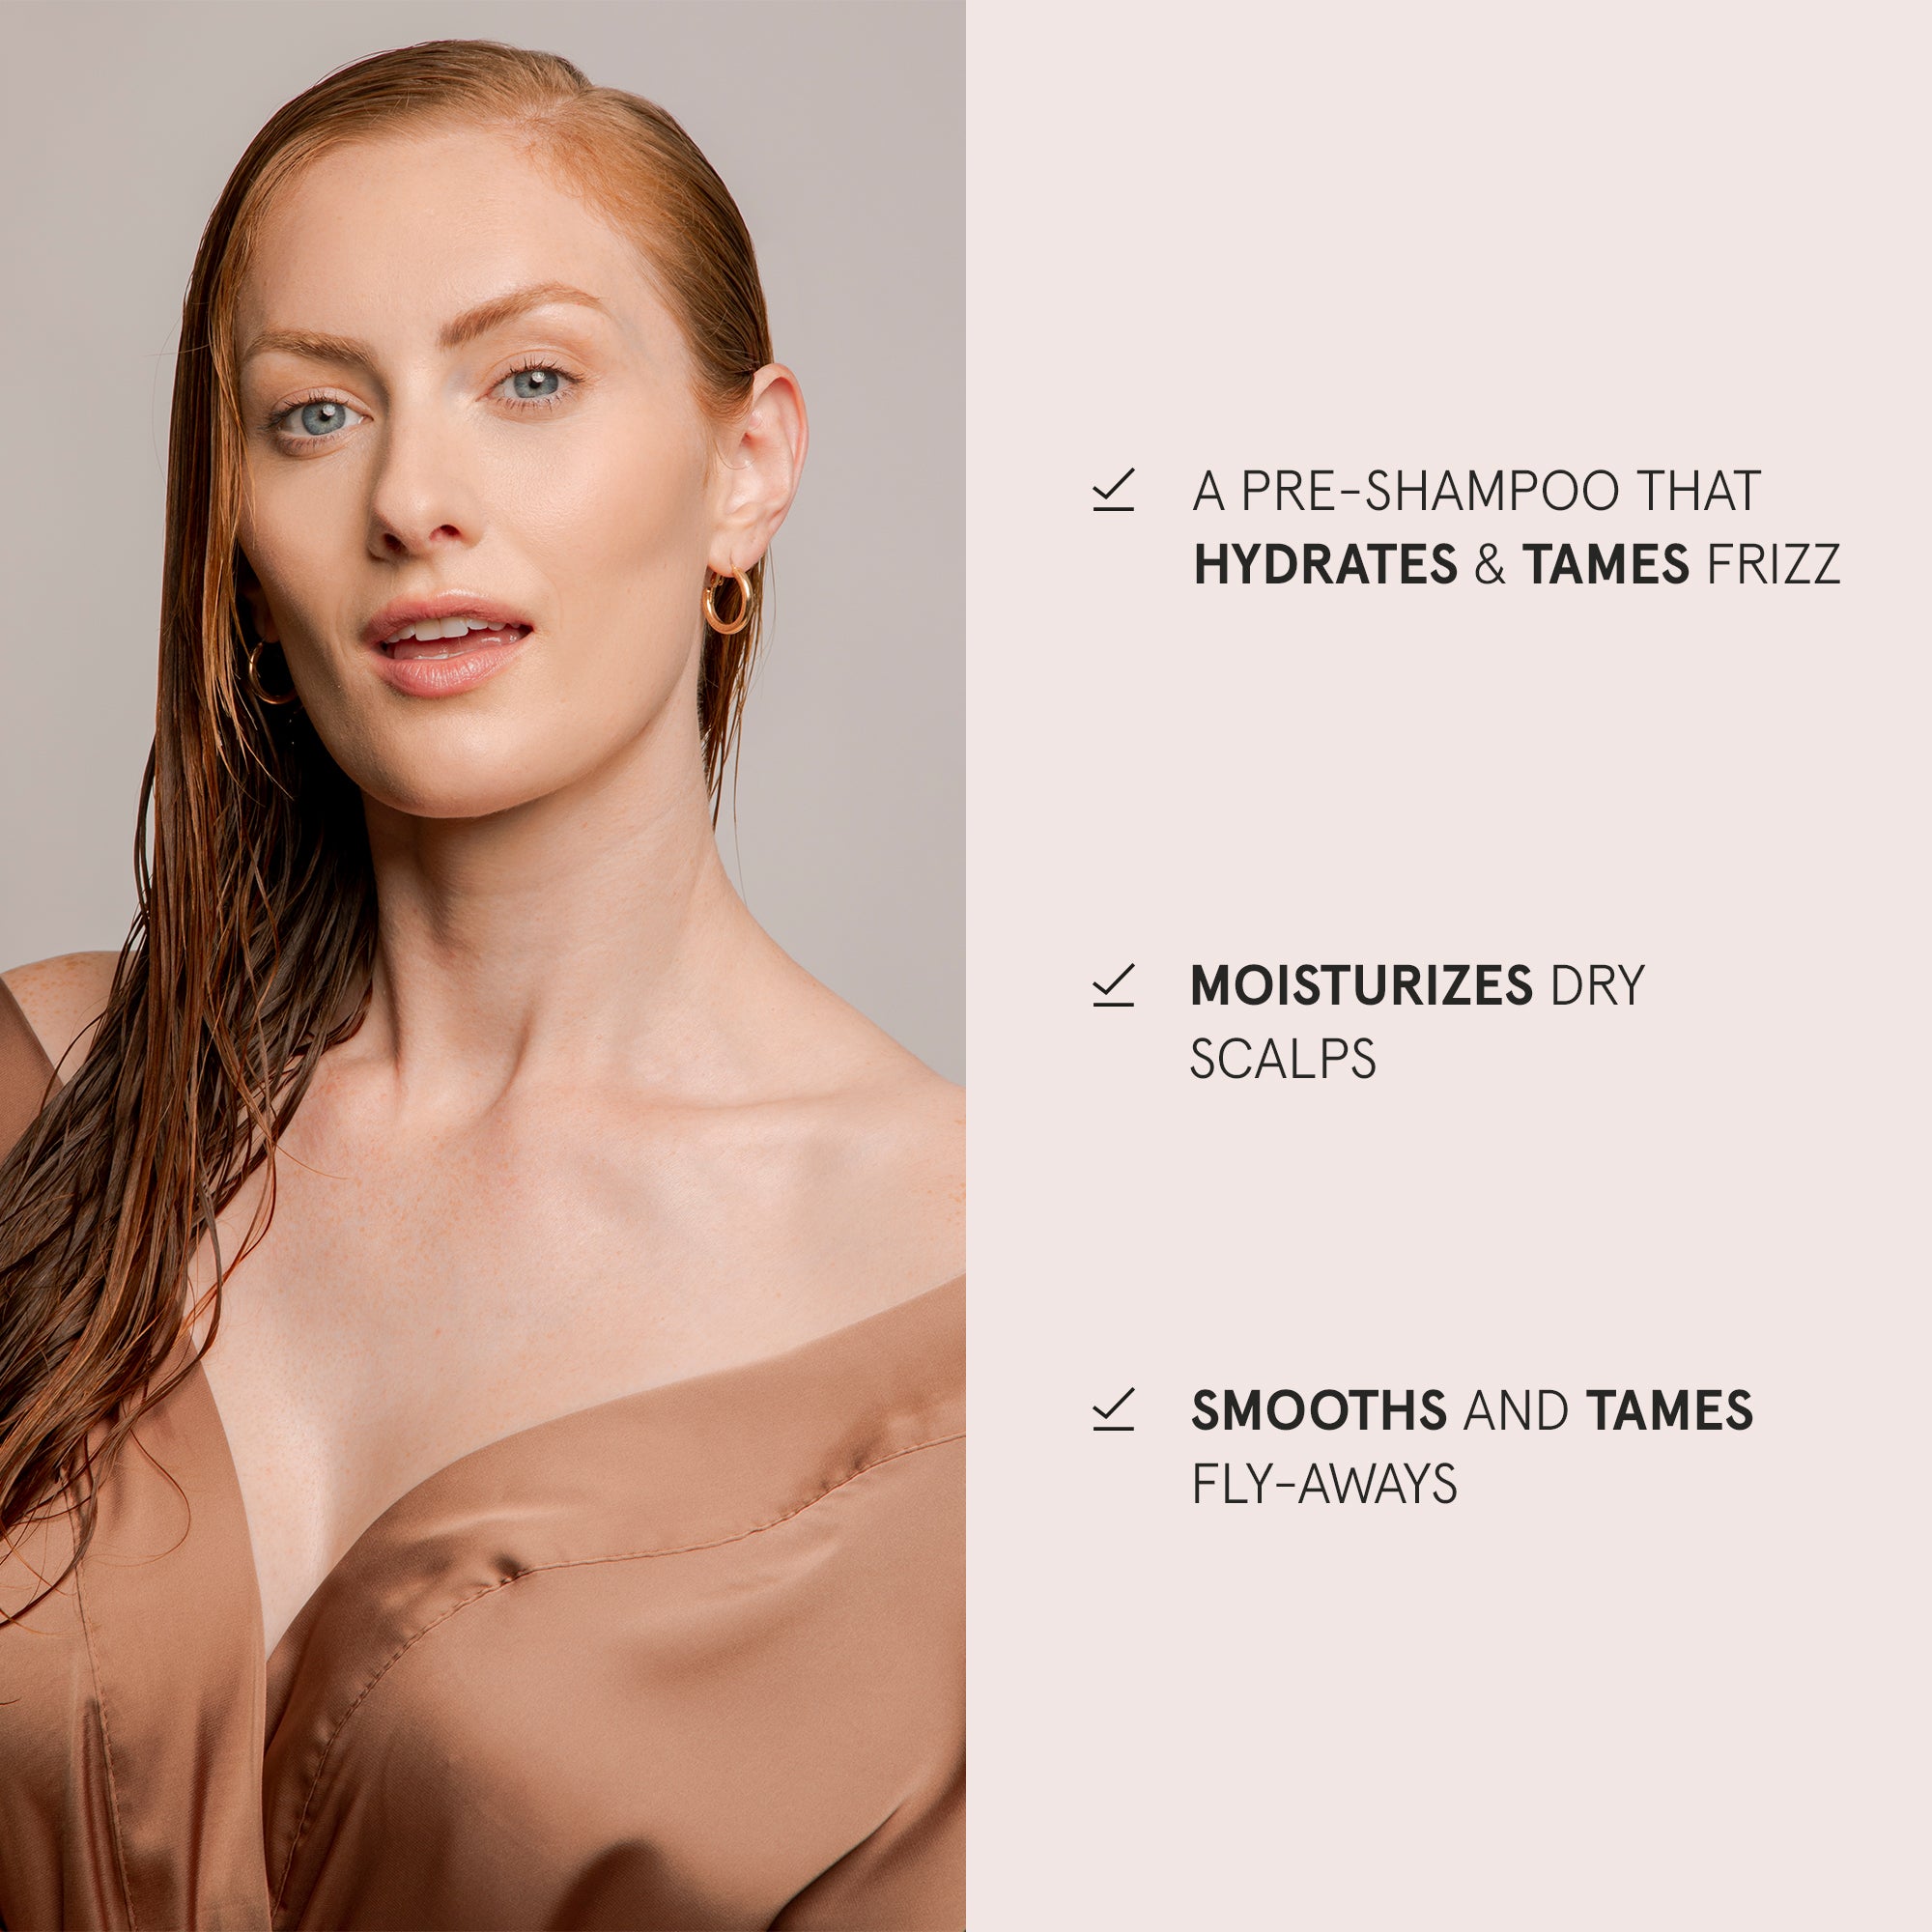 How to Oil Hair Effectively Before Washing: 9 Steps